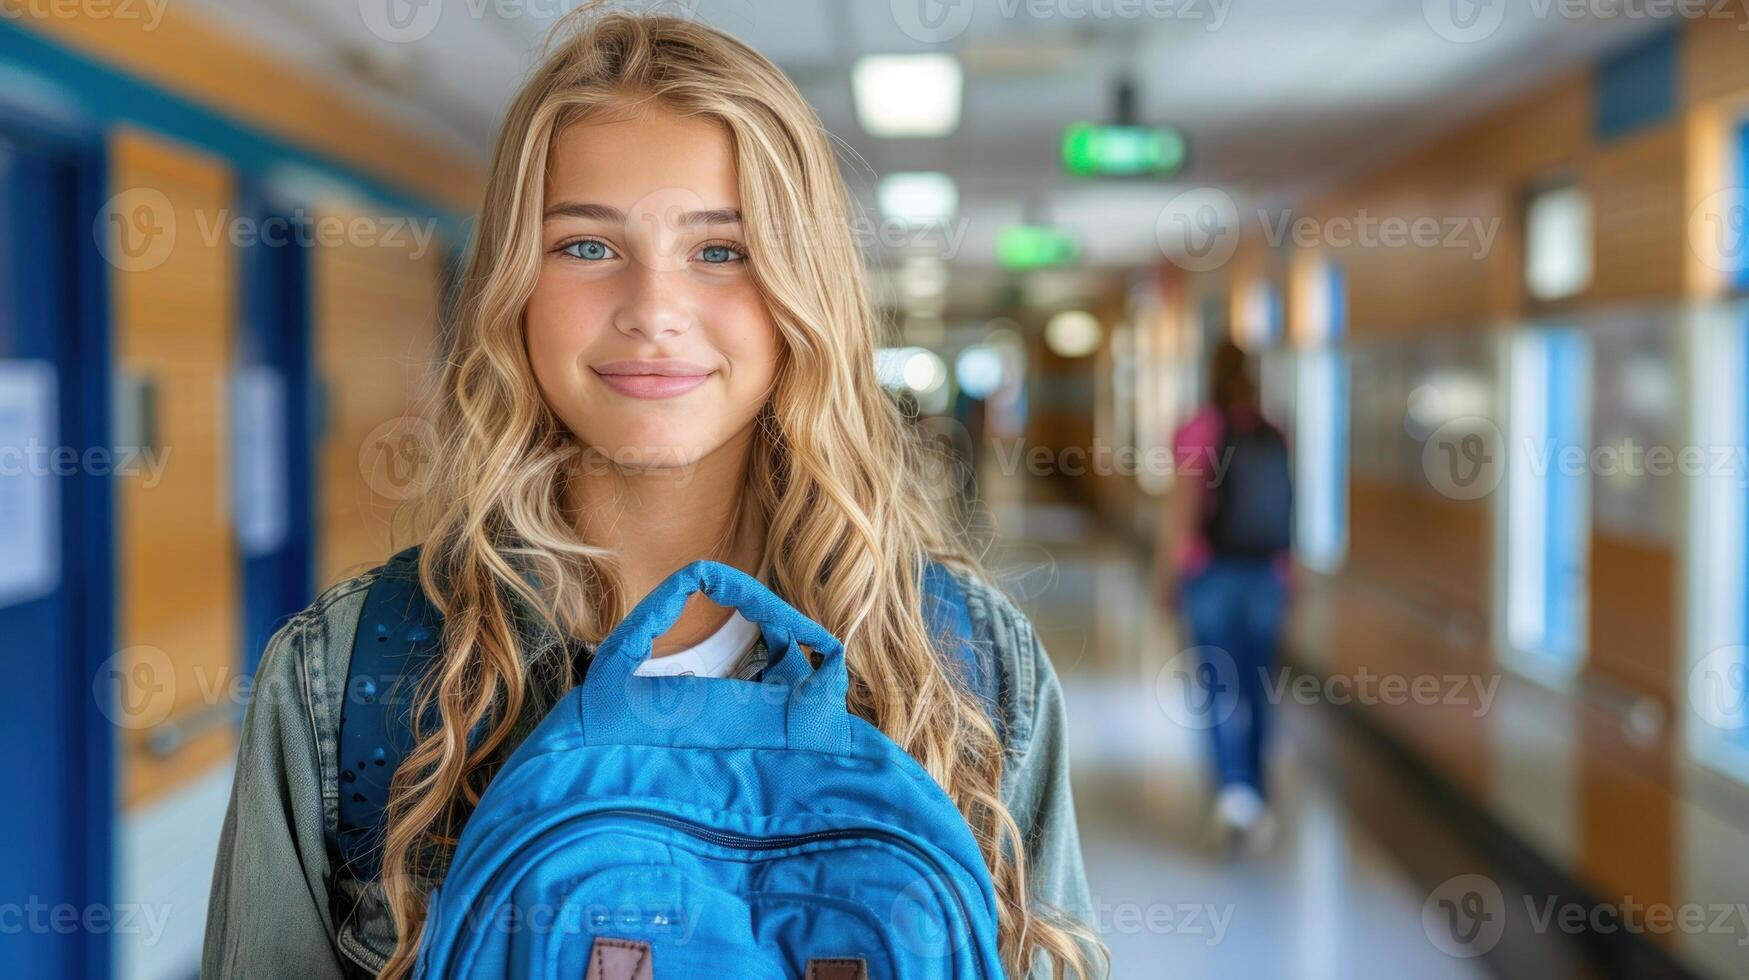 A young girl with a blue backpack walking through a hallway photo